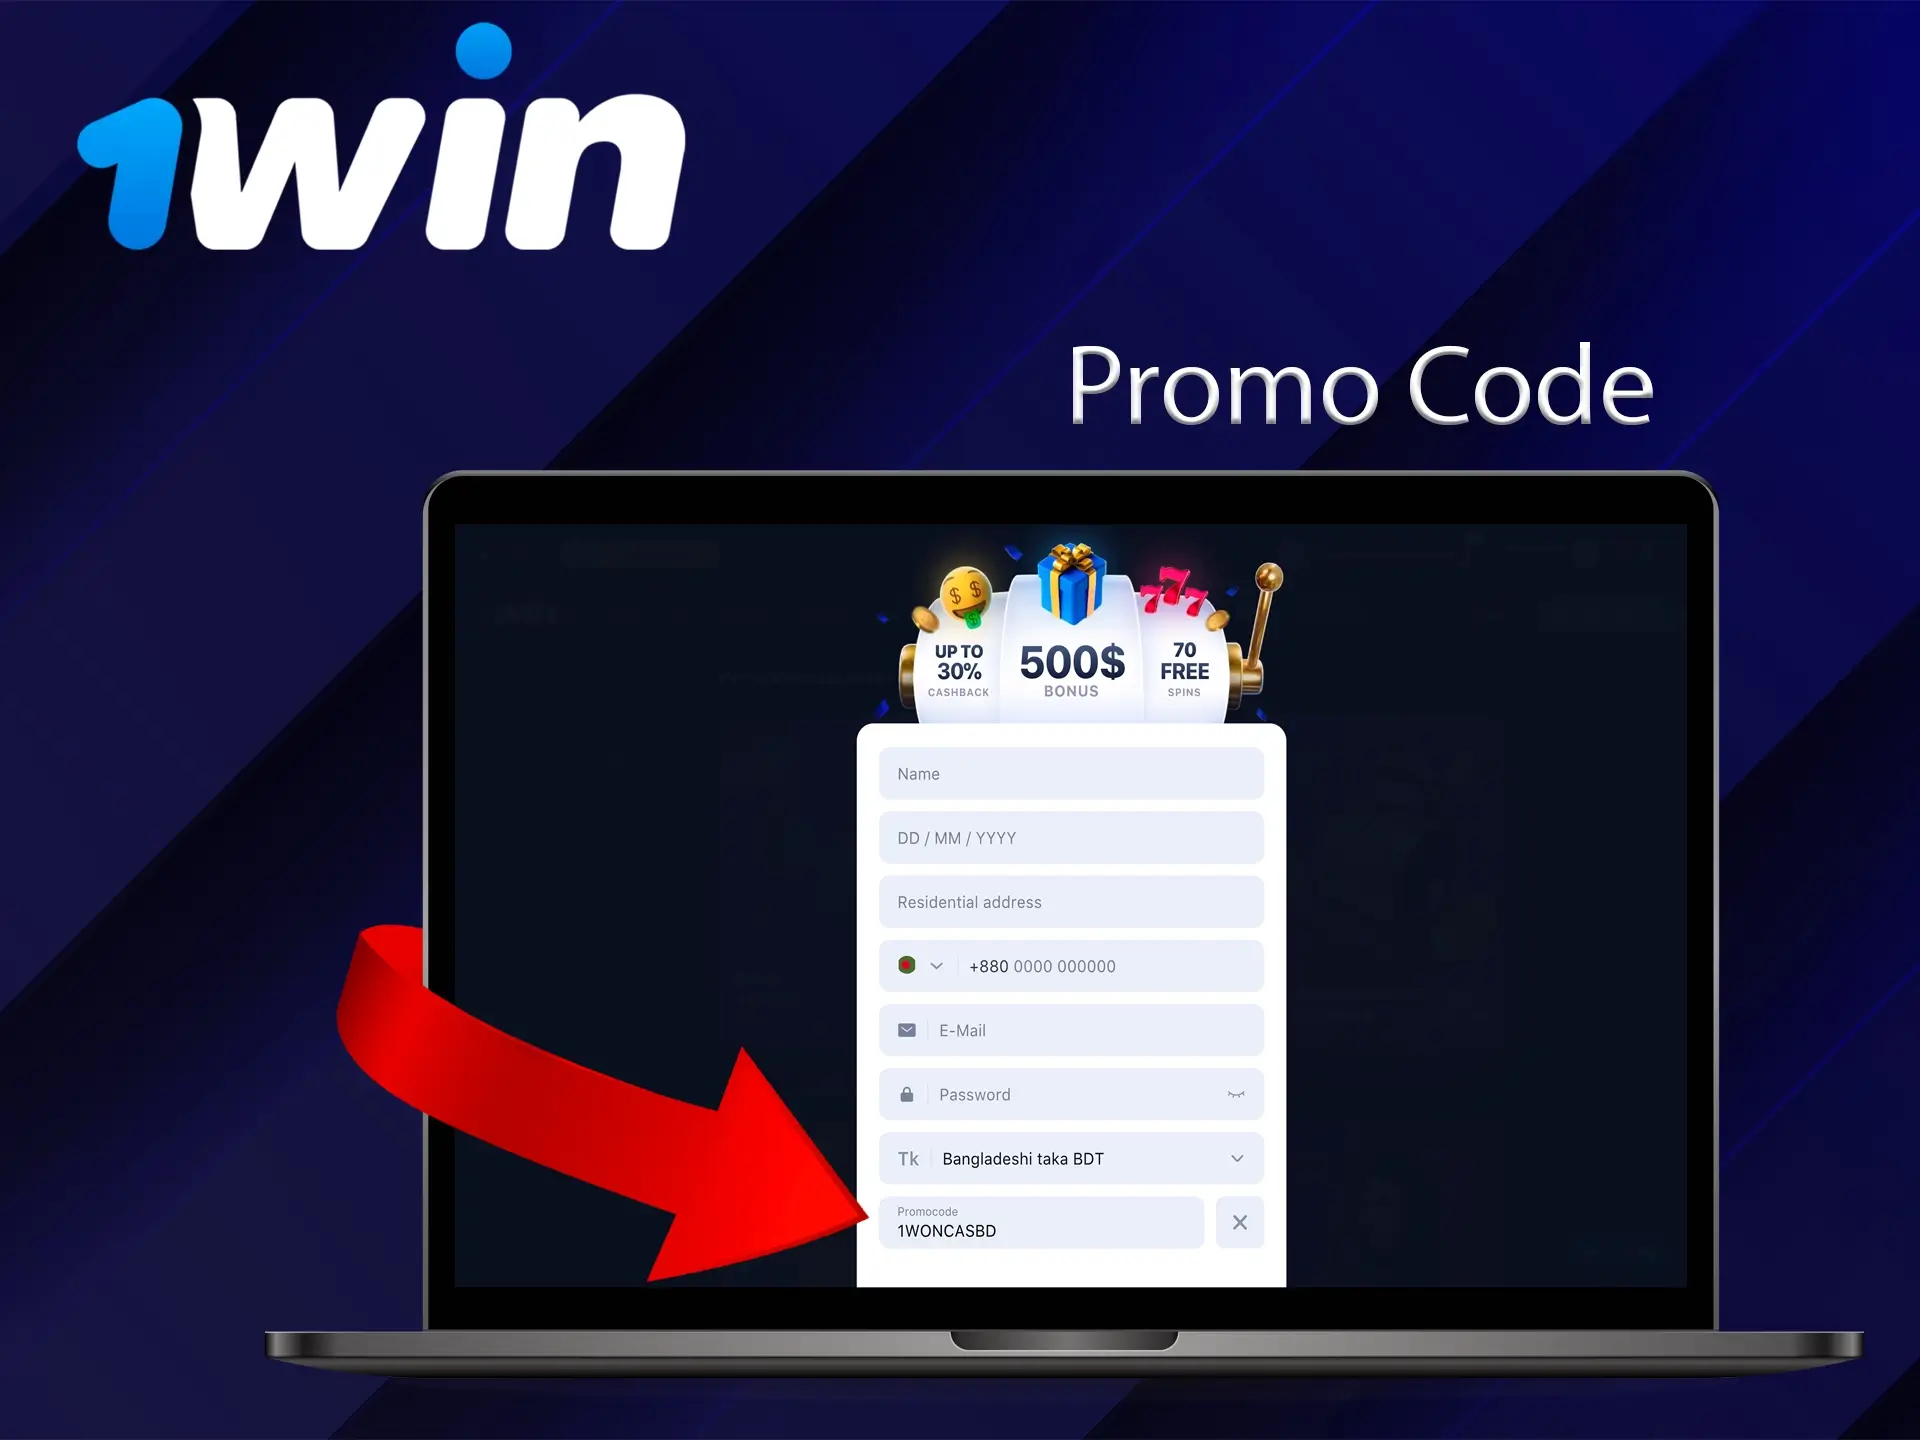 The promo code will give you access to new features and promotions from 1Win.